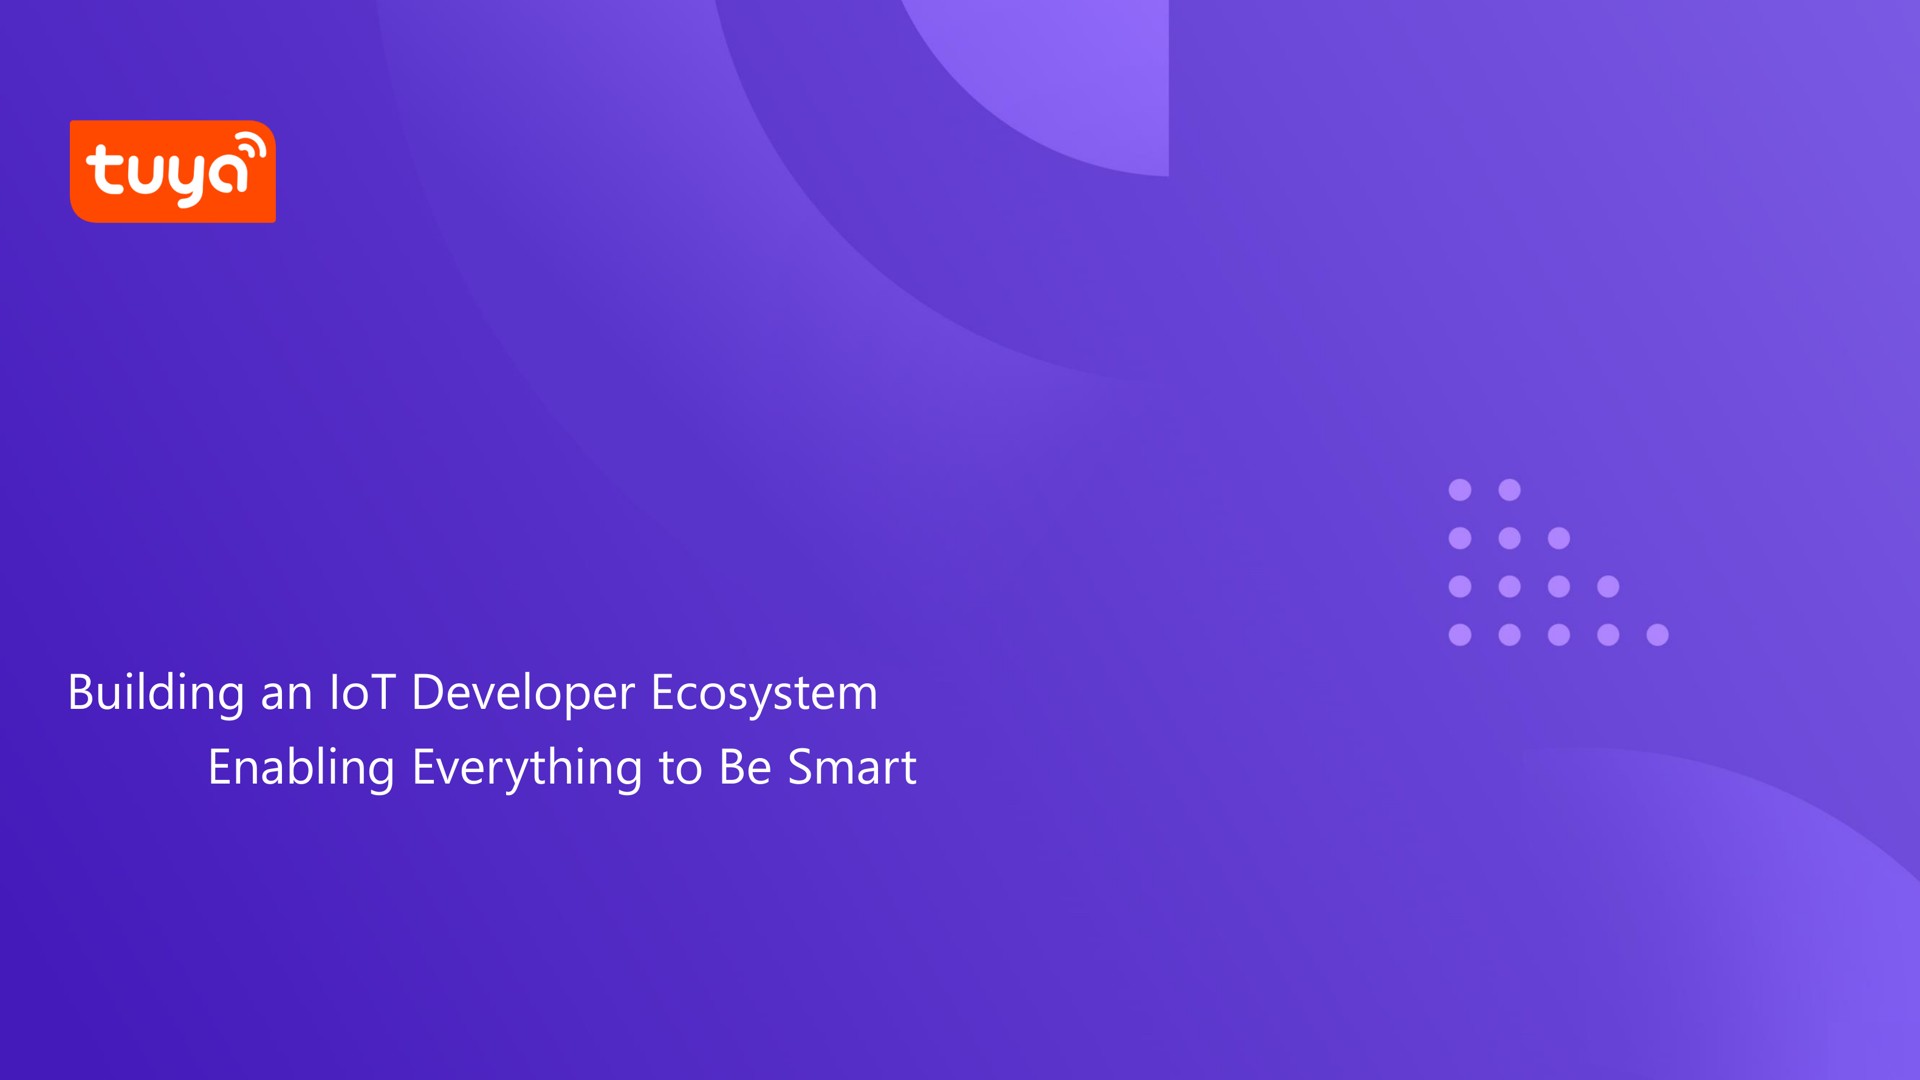 building an developer ecosystem enabling everything to be smart a lot | Tuya